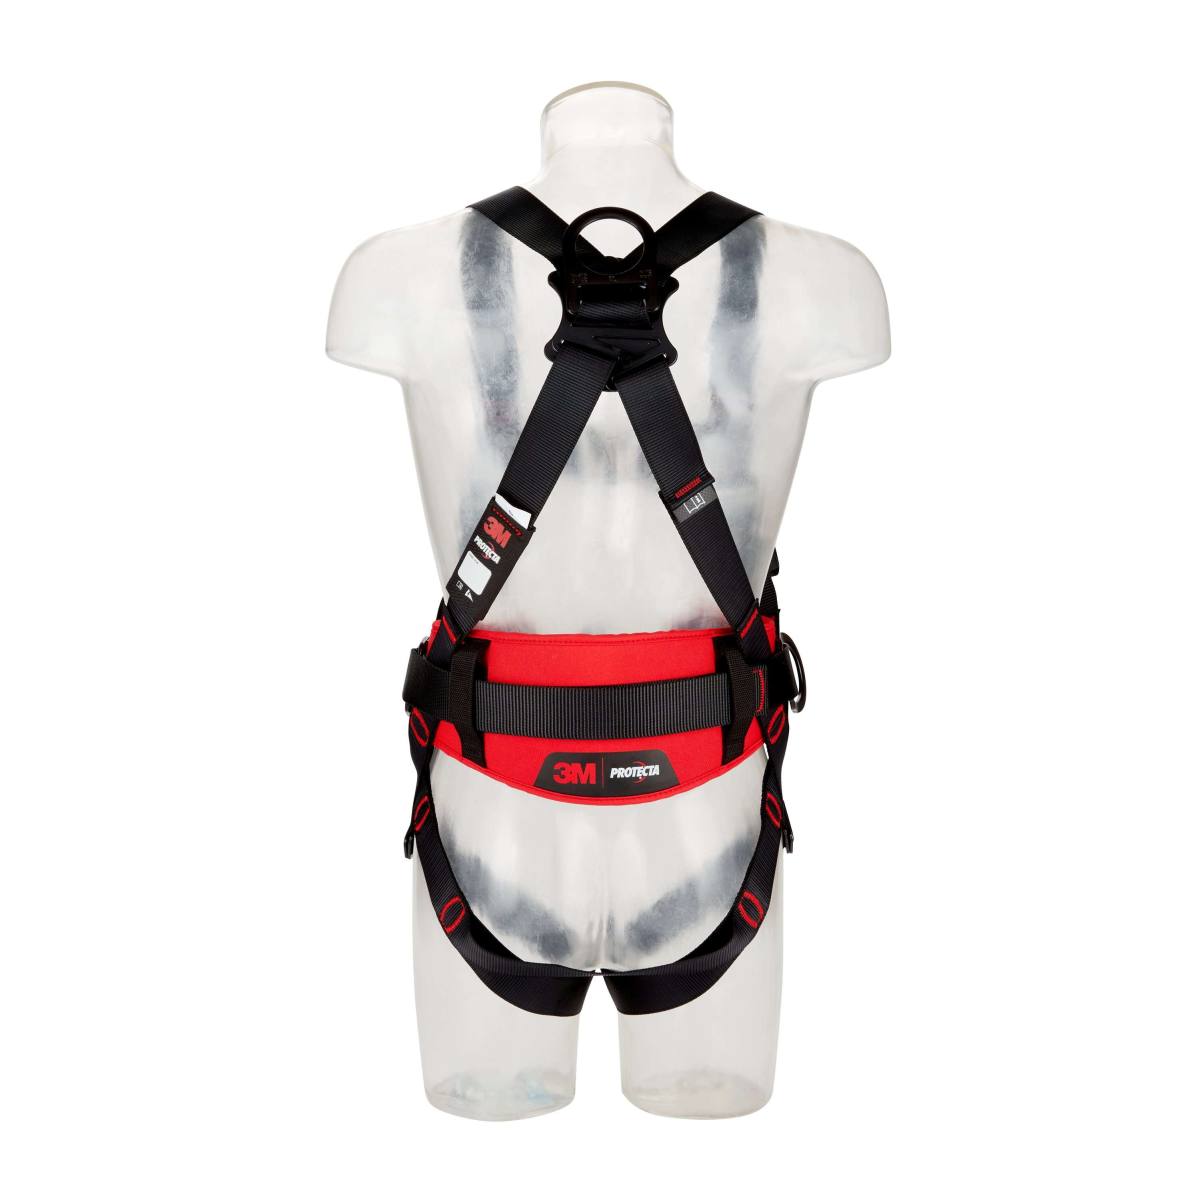 3M PROTECTA Full body harness - chest and rear fall arrest eyelets, comfort harness with side attachment points, standard VS, chest and rear fall indicators, harness end depot, label protector with labelling field, black coated coating, XL